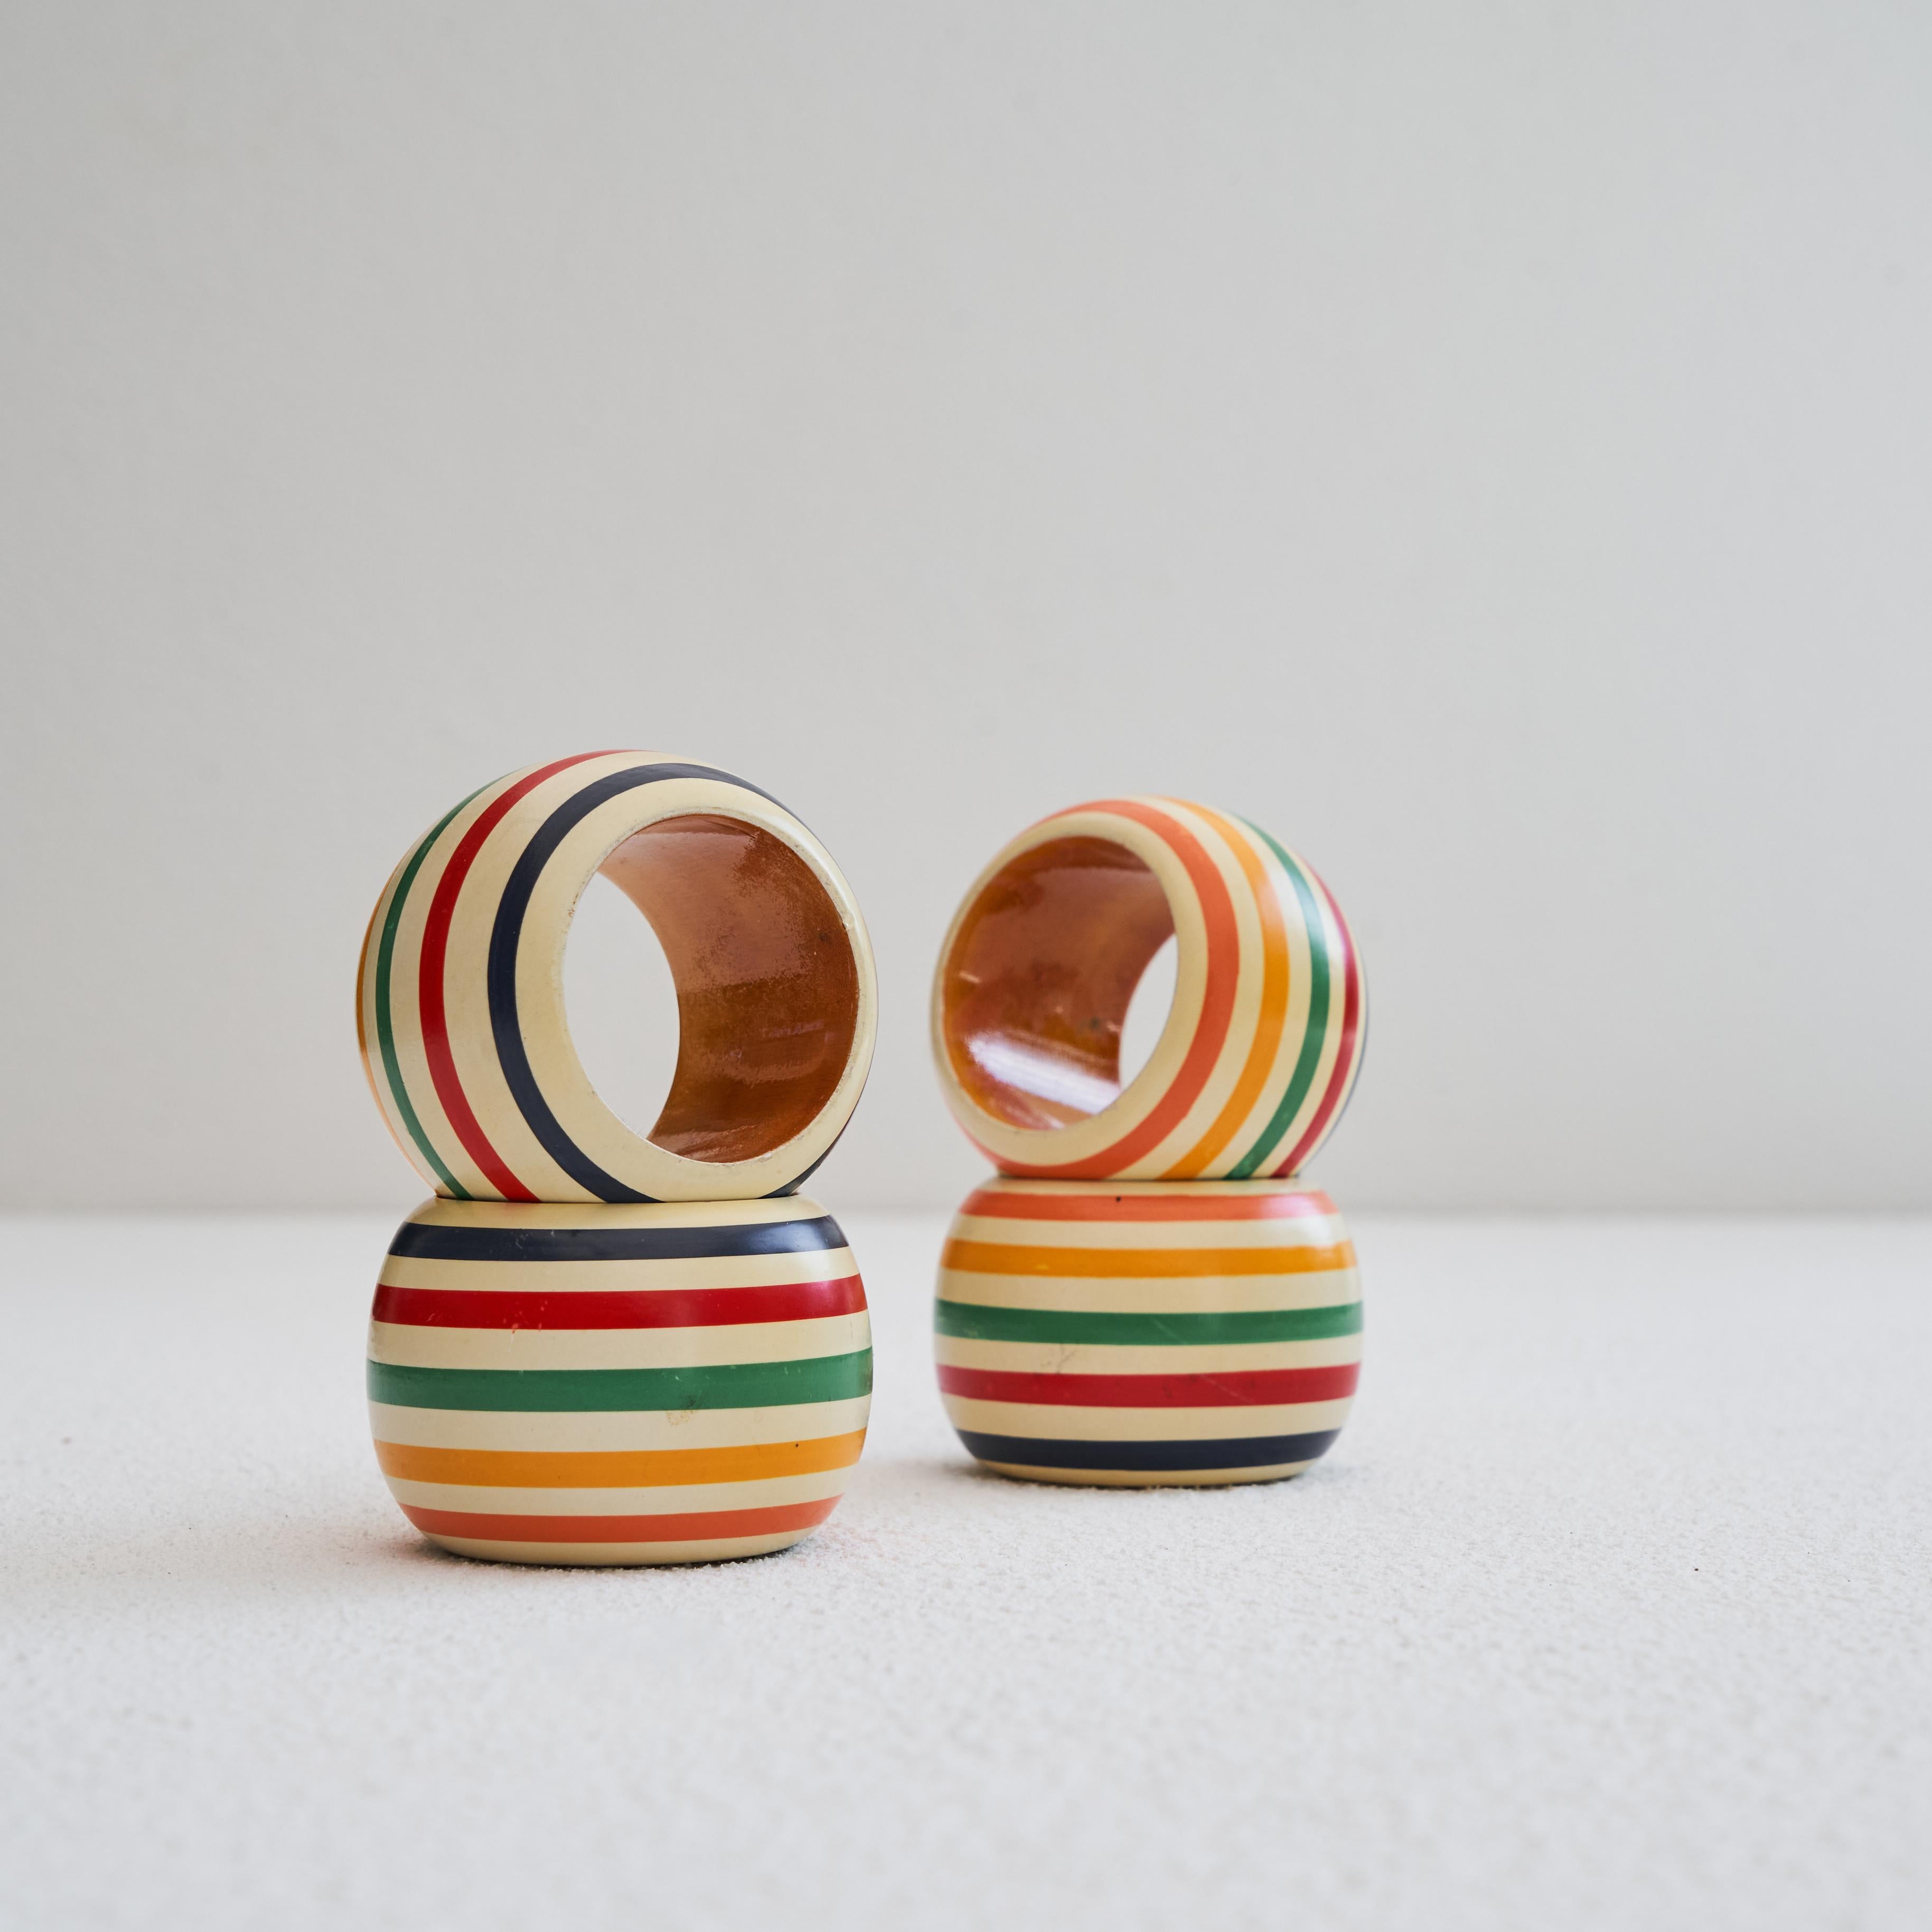 Set of 4 Colorful Napkin Rings in Painted Wood, 1970s.

This is a fun set of 4 colorful napkin rings in painted wood. Great bright colors and in a wonderful condition, these napkin rings will brighten up your dining table with their mid-century